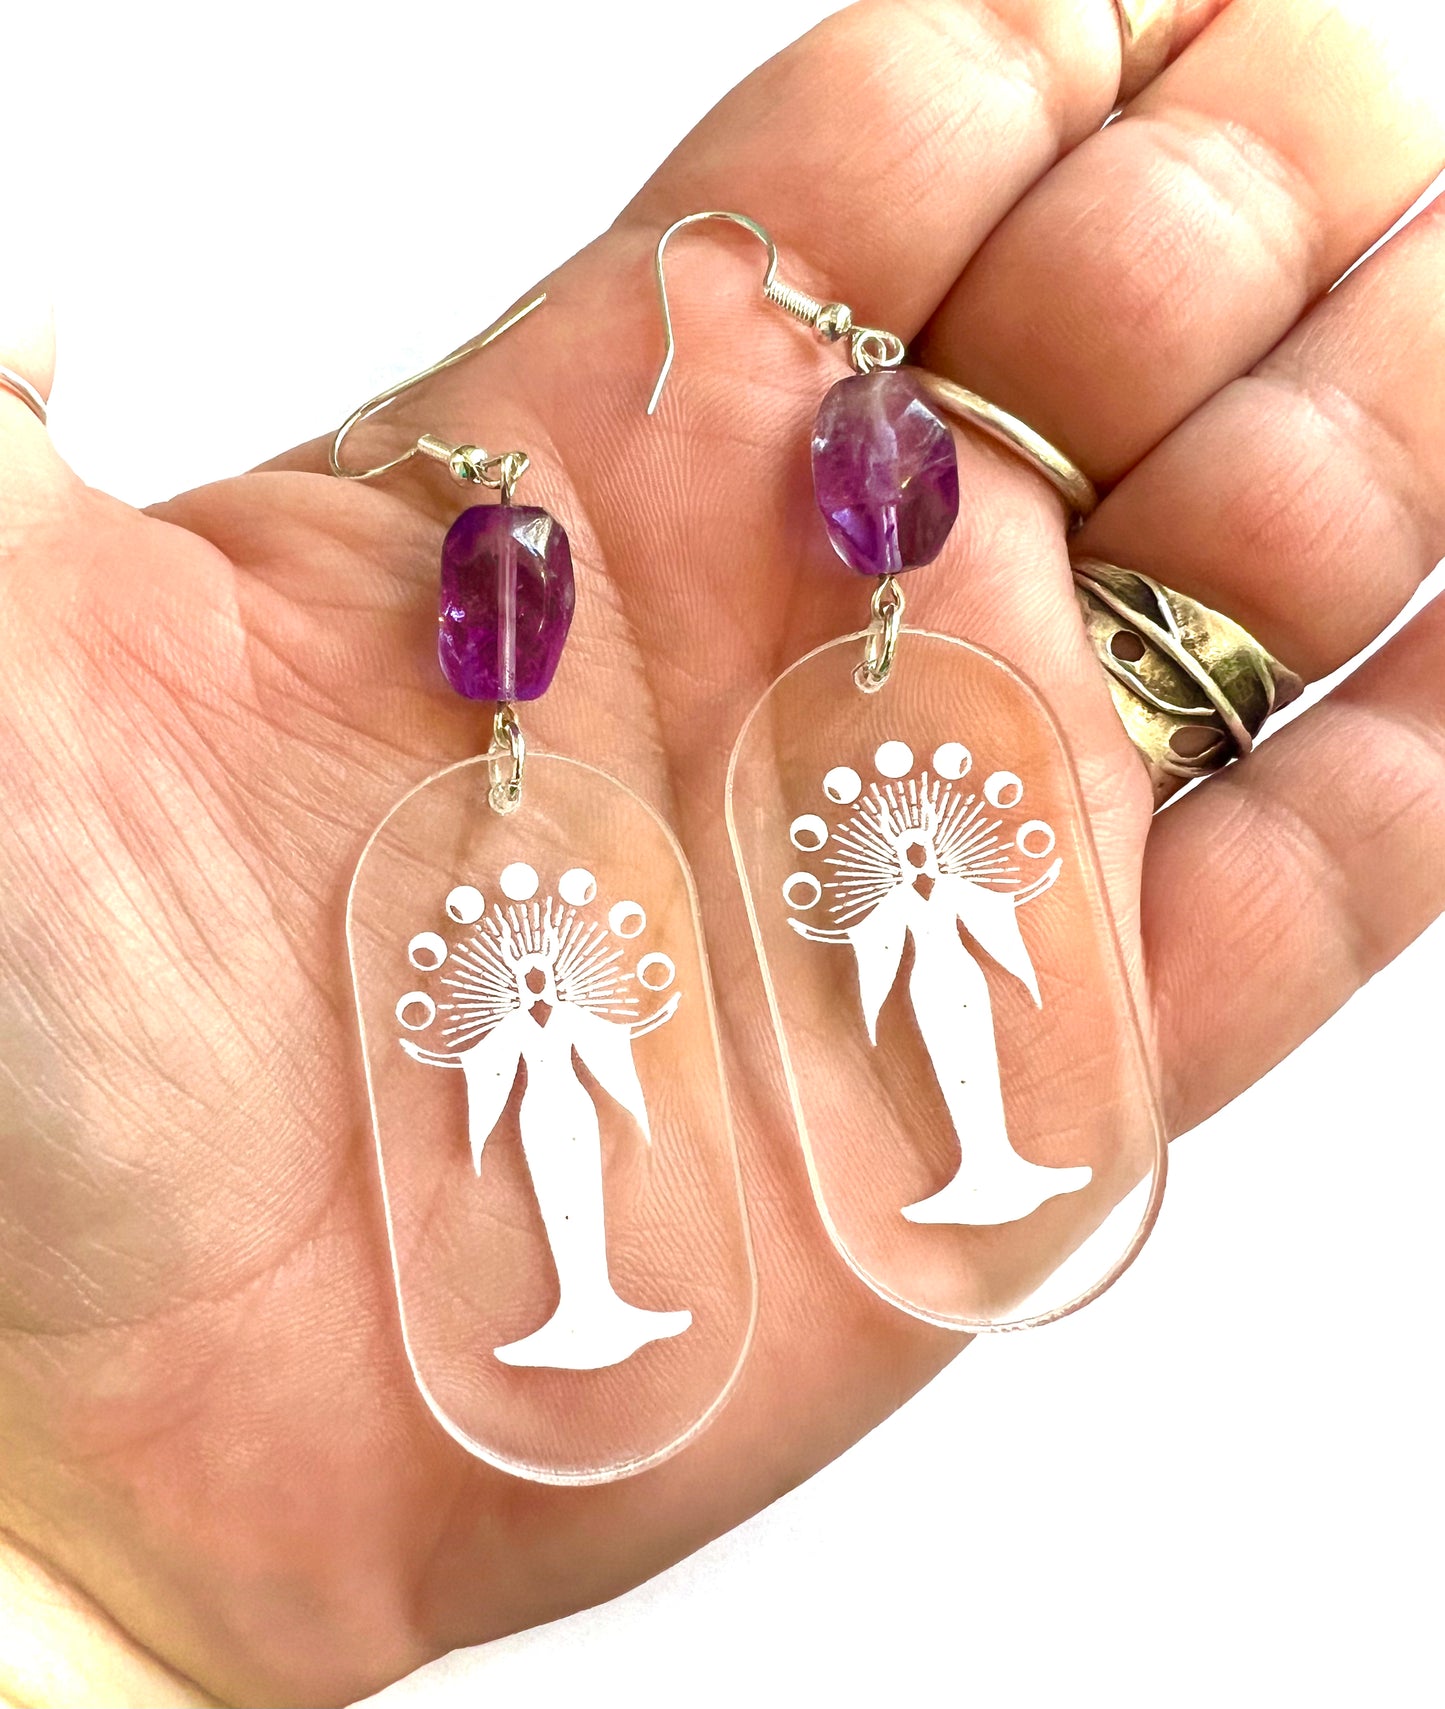 Chrystal Clear Moon Goddess Etched Earrings